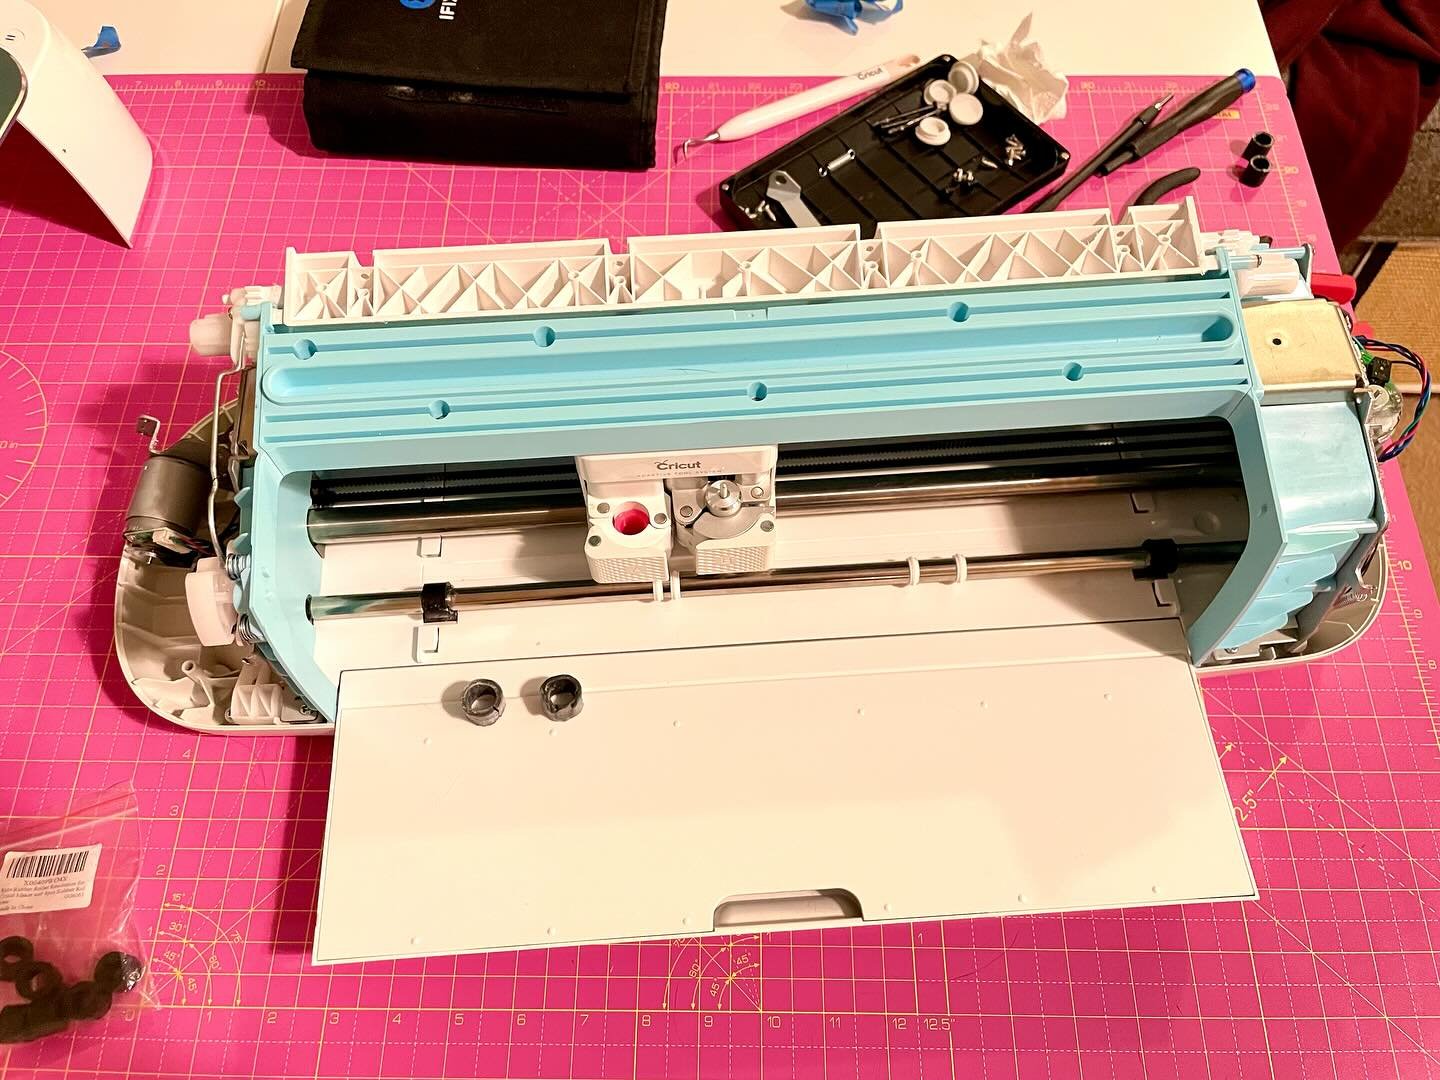 I&rsquo;ve had a cricut for about 2 years and the rubber rollers started to dry out and get super wonky. I&rsquo;d been dreading opening it up to do the replacement but I finally did it and it worked great.

#diy #tech #repair #righttorepair #cricut 